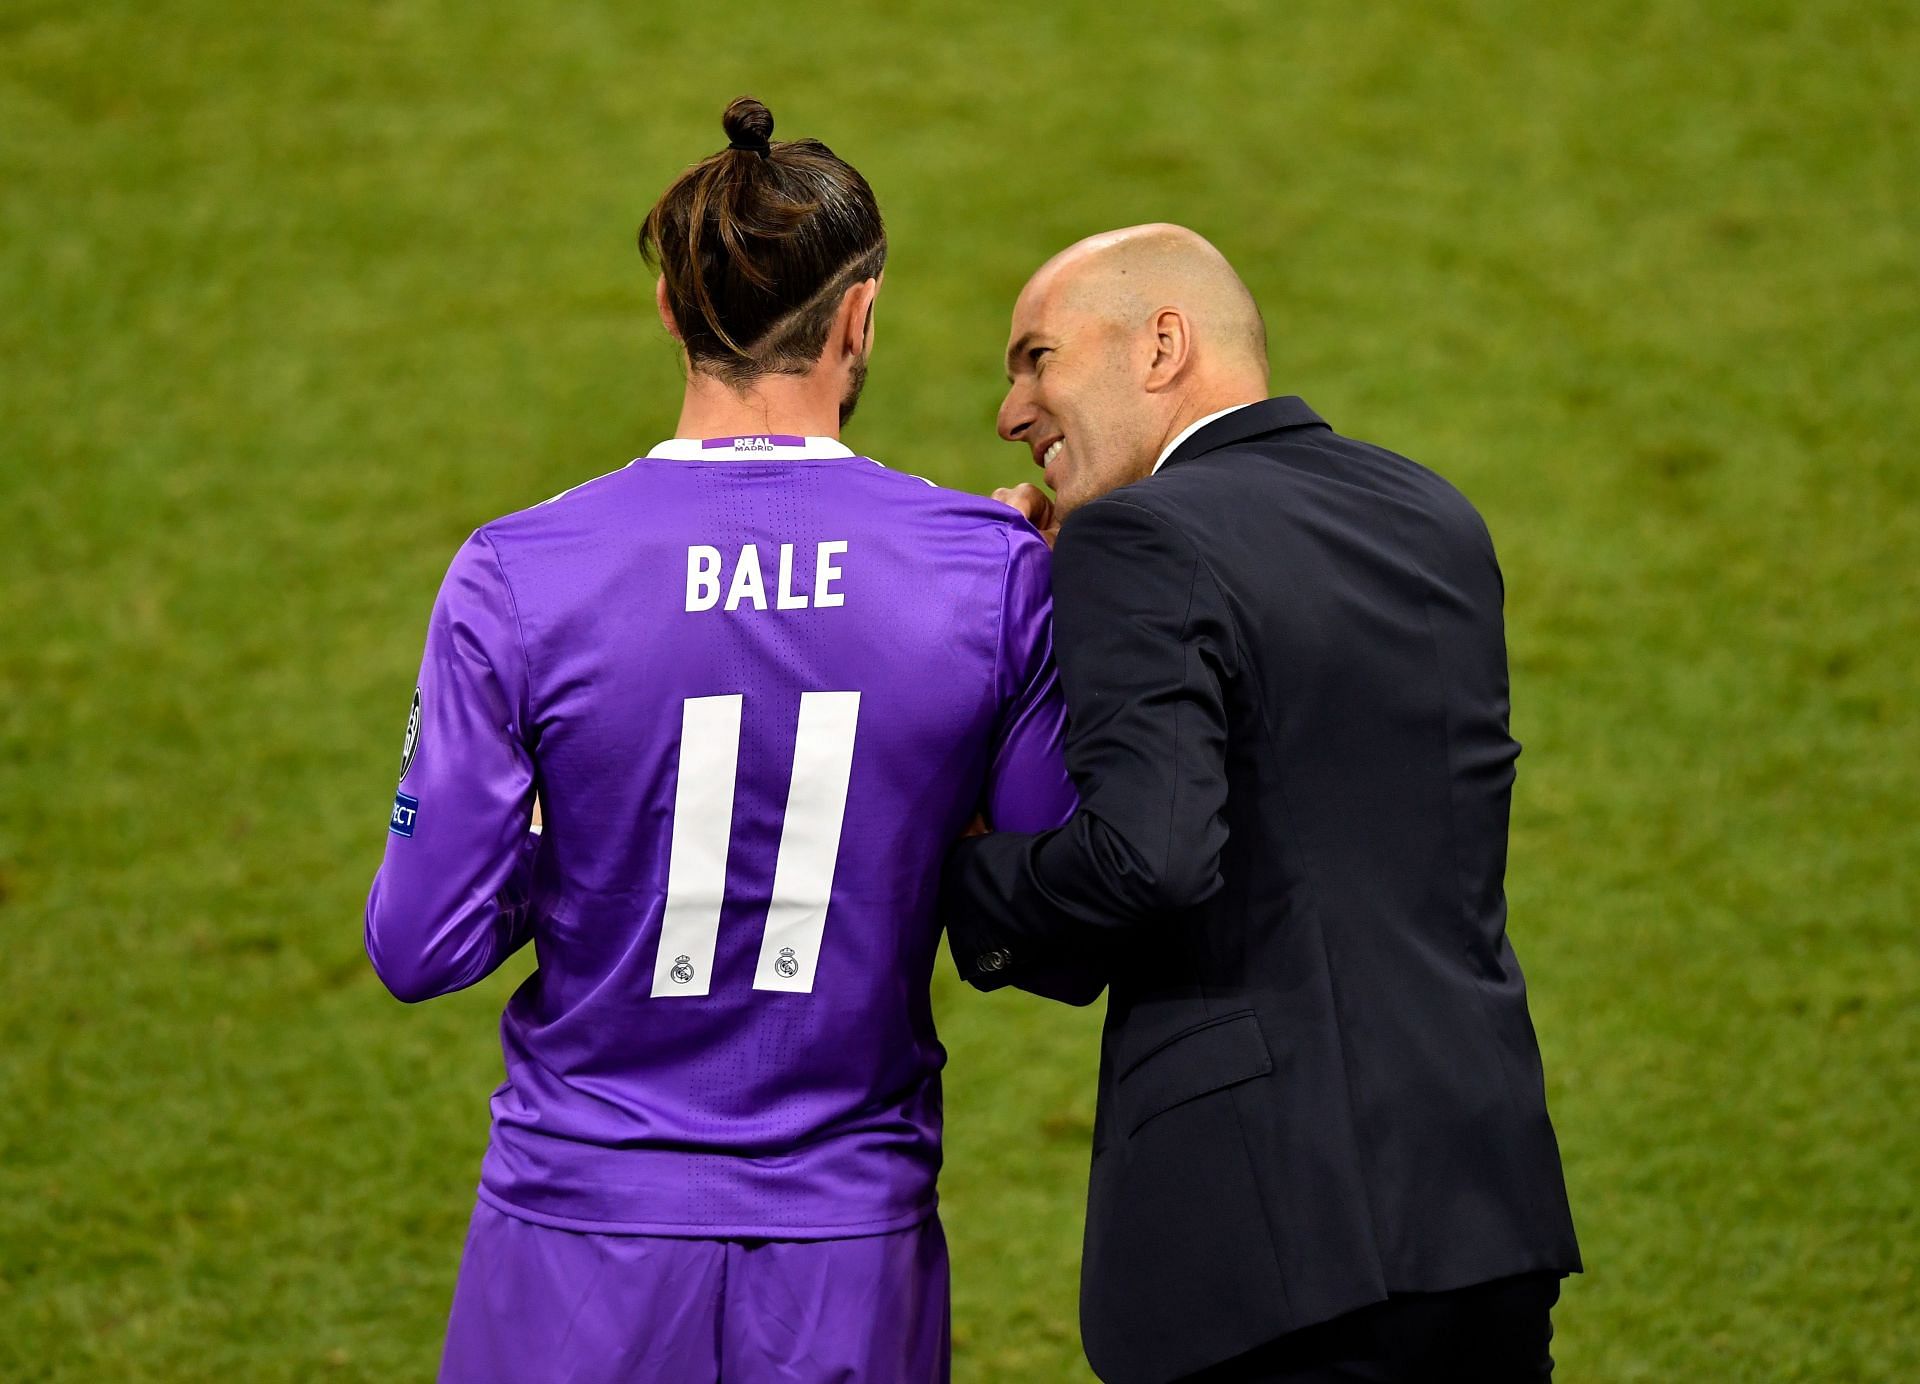 The relationship between Gareth Bale and Zinedine Zidane at Real Madrid became strained